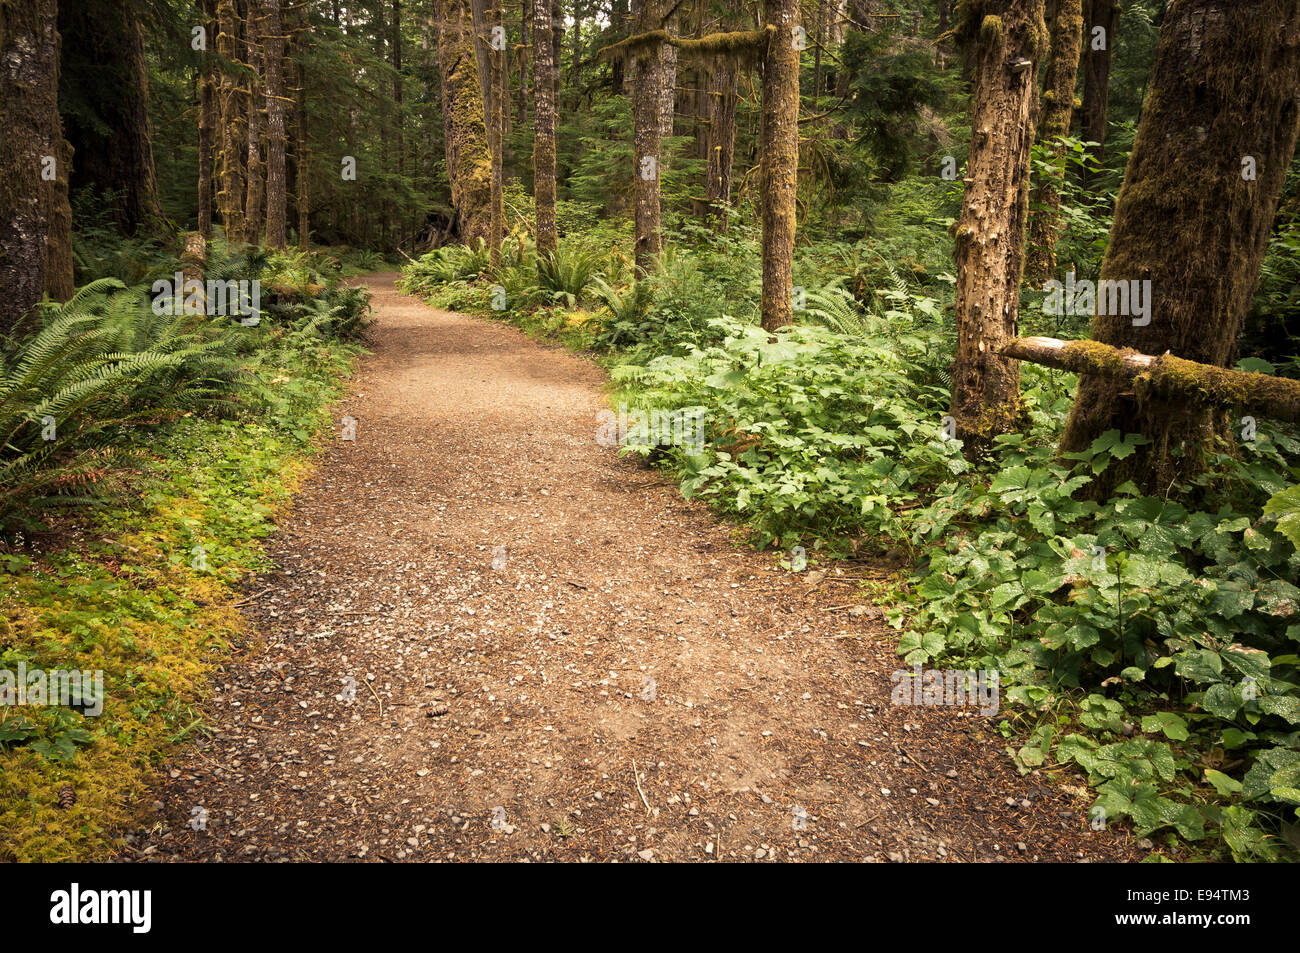 Trail through old growth forest, Staircase Area, Olympic National Park, Washington, USA Stock Photo